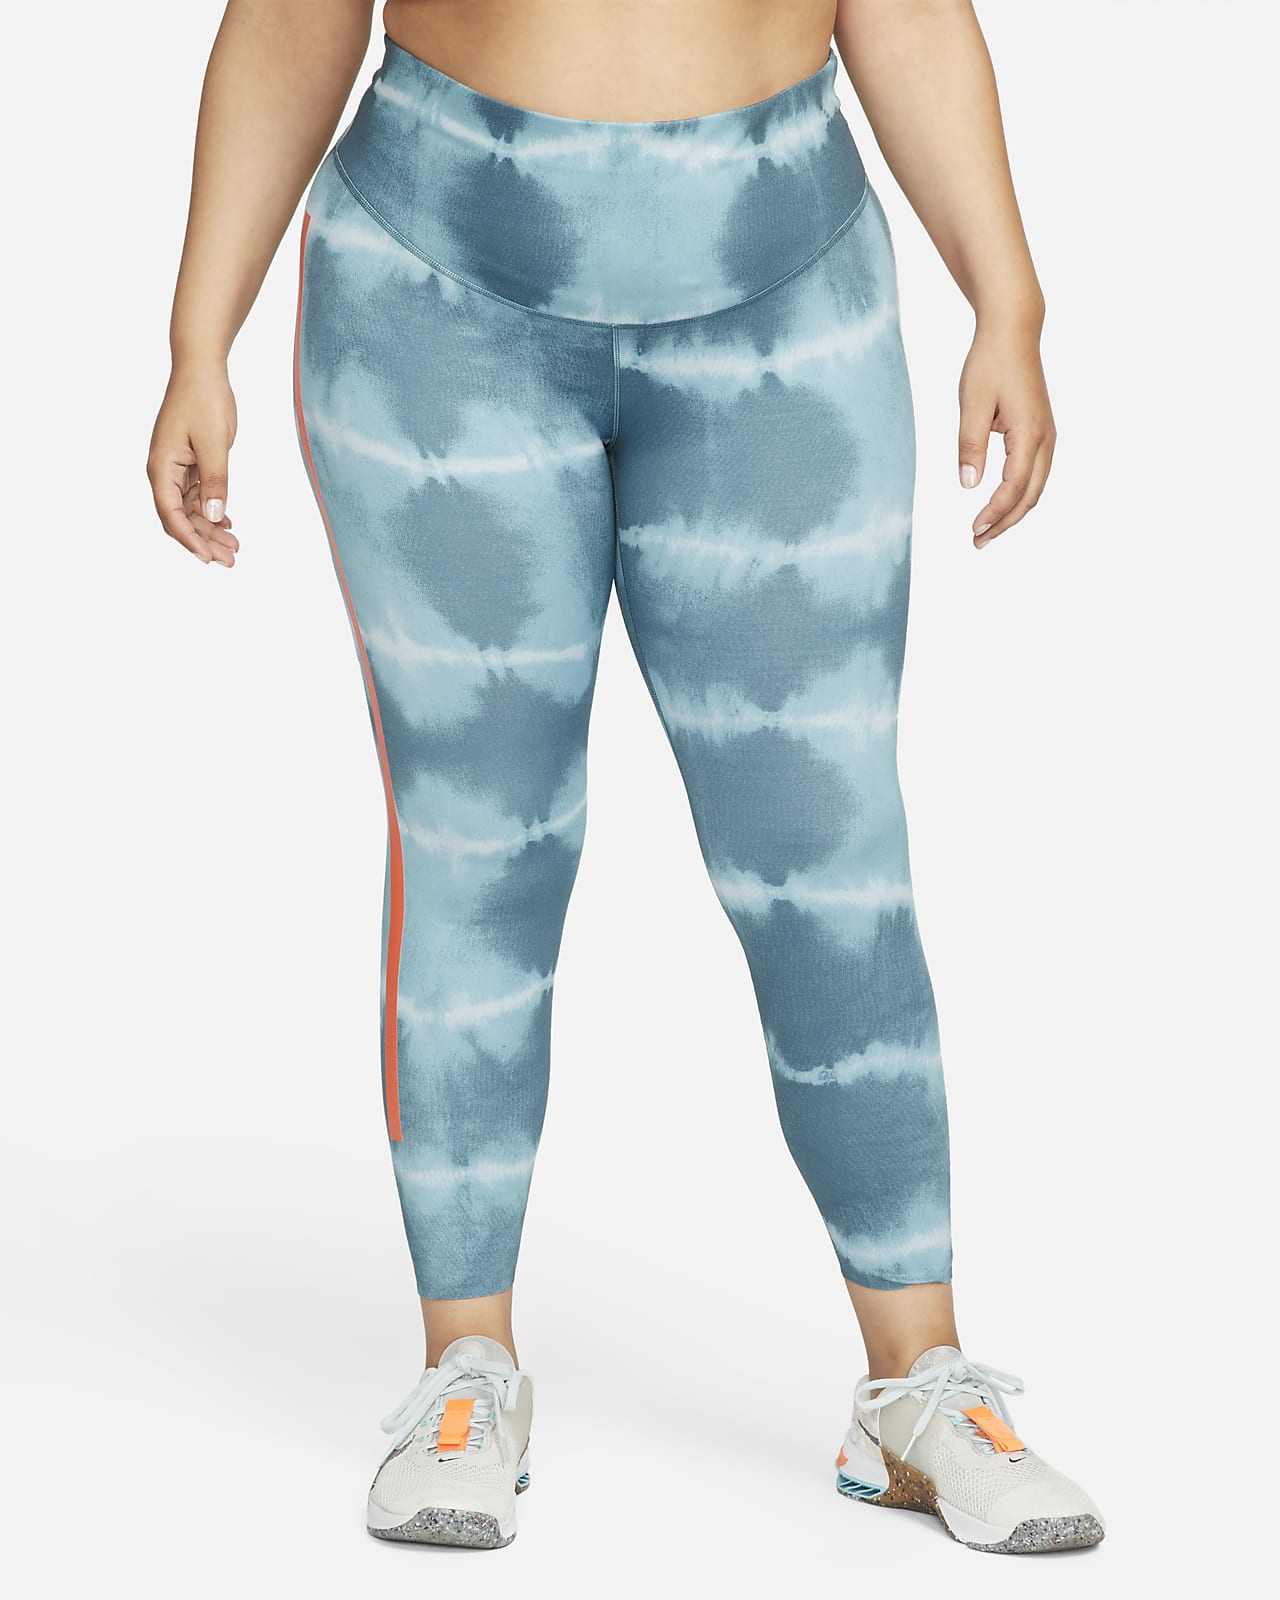 Nike One Luxe Women's Mid-Rise Printed Training Leggings (Plus Size)